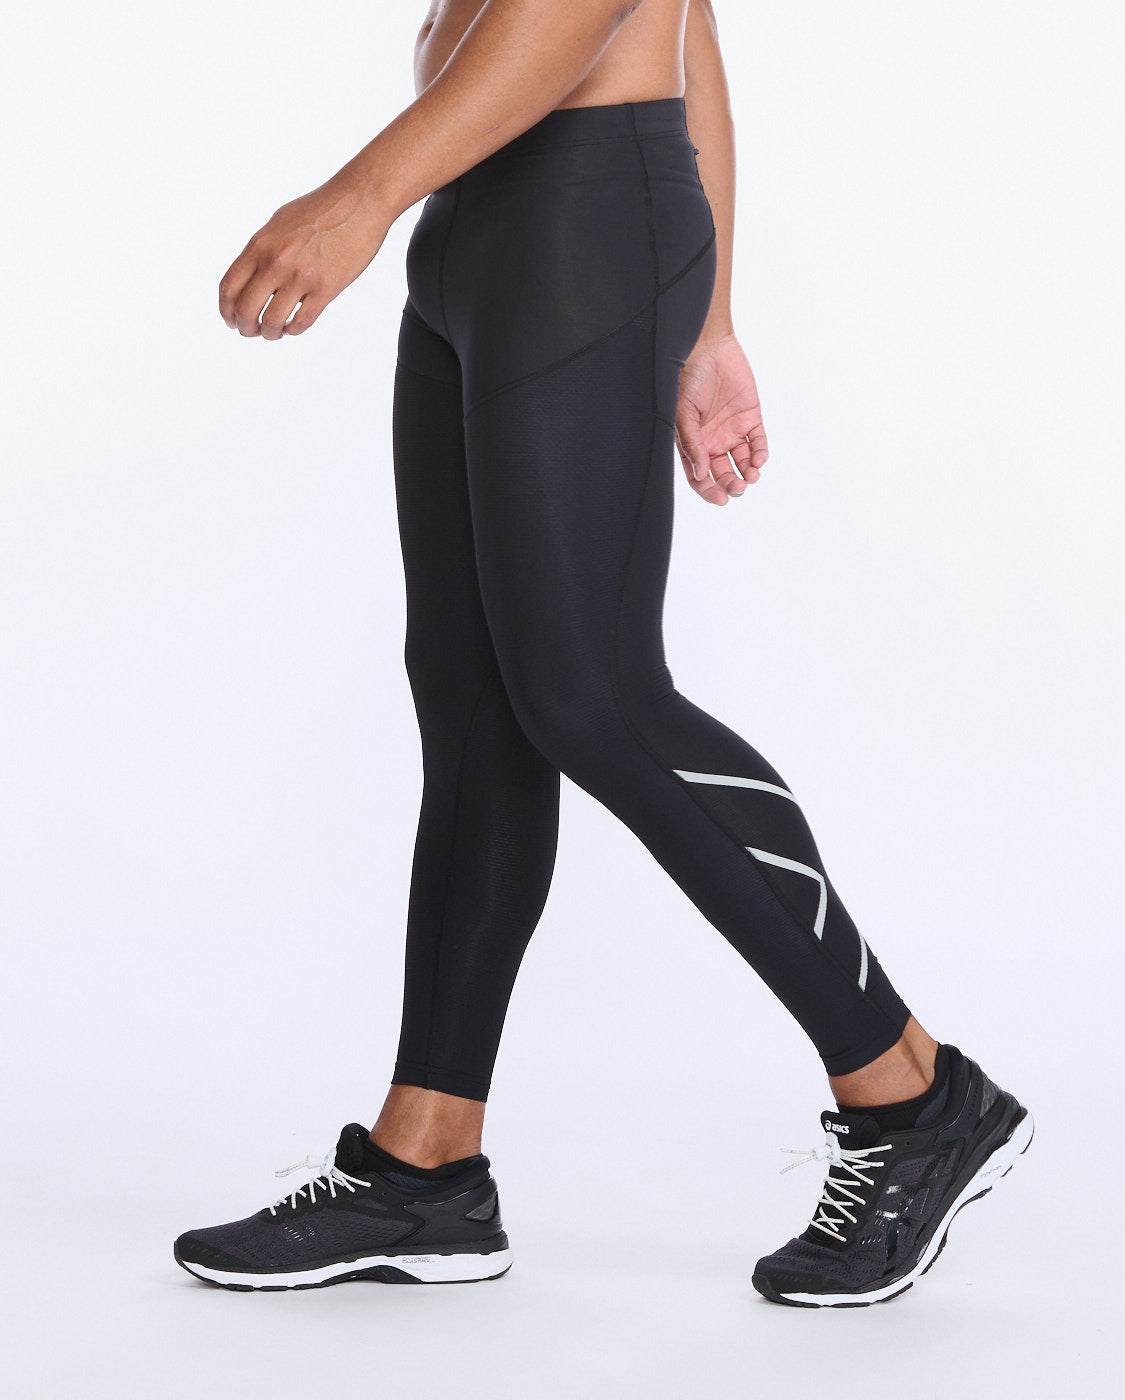 Buy 2XU Post-Natal Sport Compression Tights (Black/Silver) Medium Online at  Low Prices in India - Amazon.in